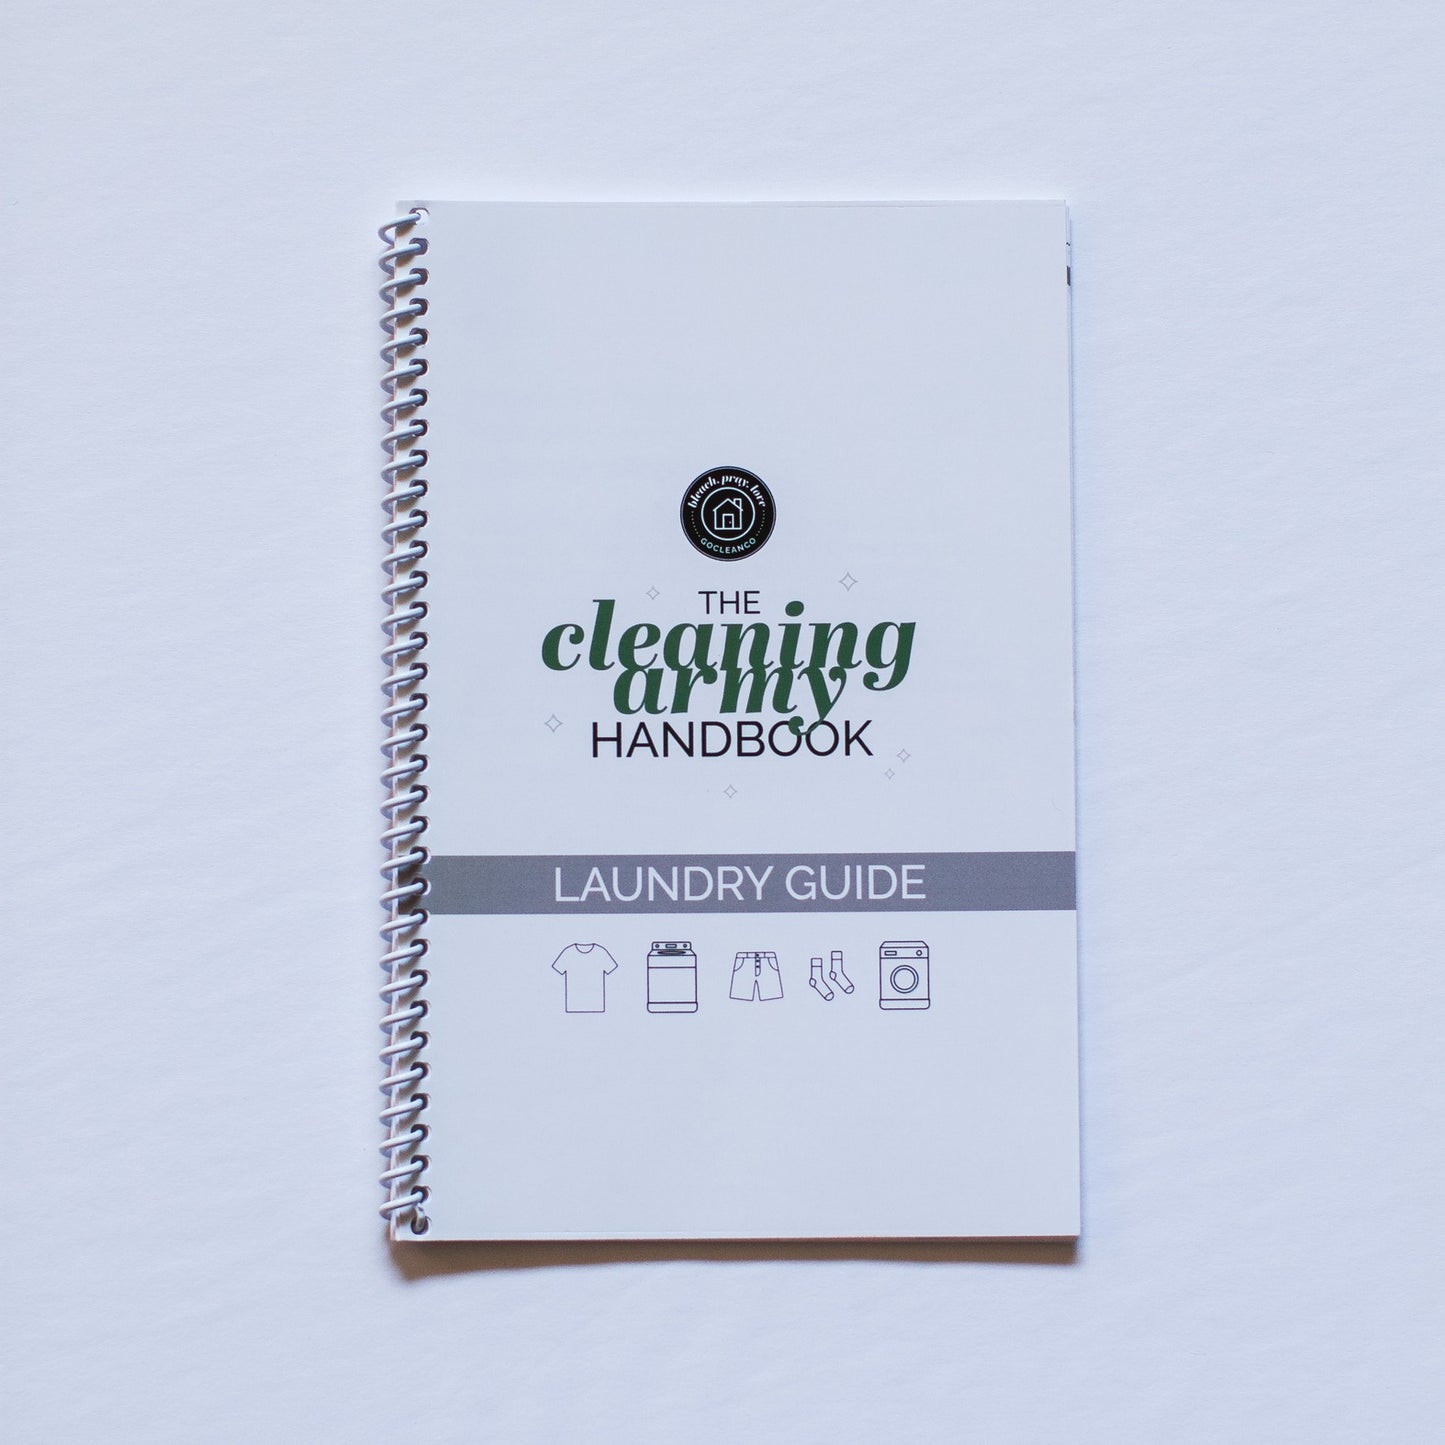 Bundles - The Cleaning Army Handbook and Laundry Guide (Hard Copies)